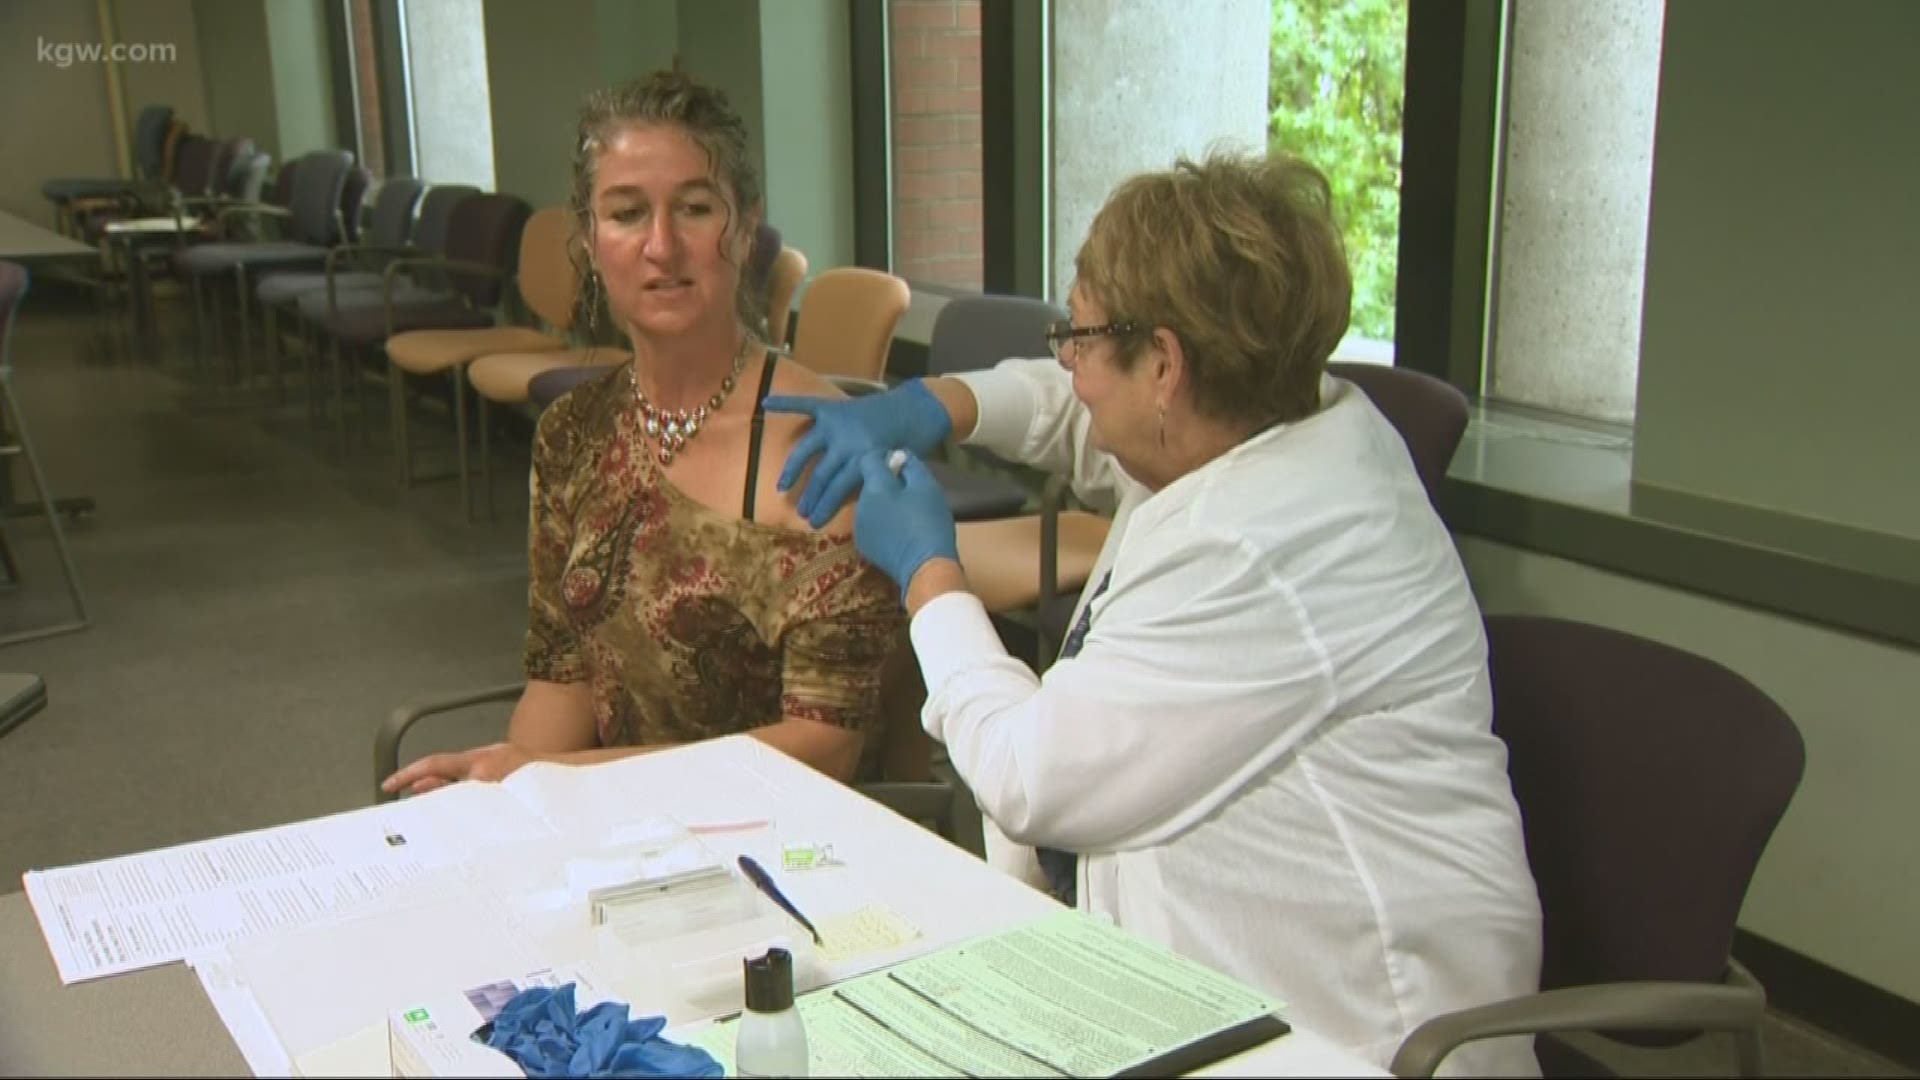 Experts recommend getting your flu shot this month.